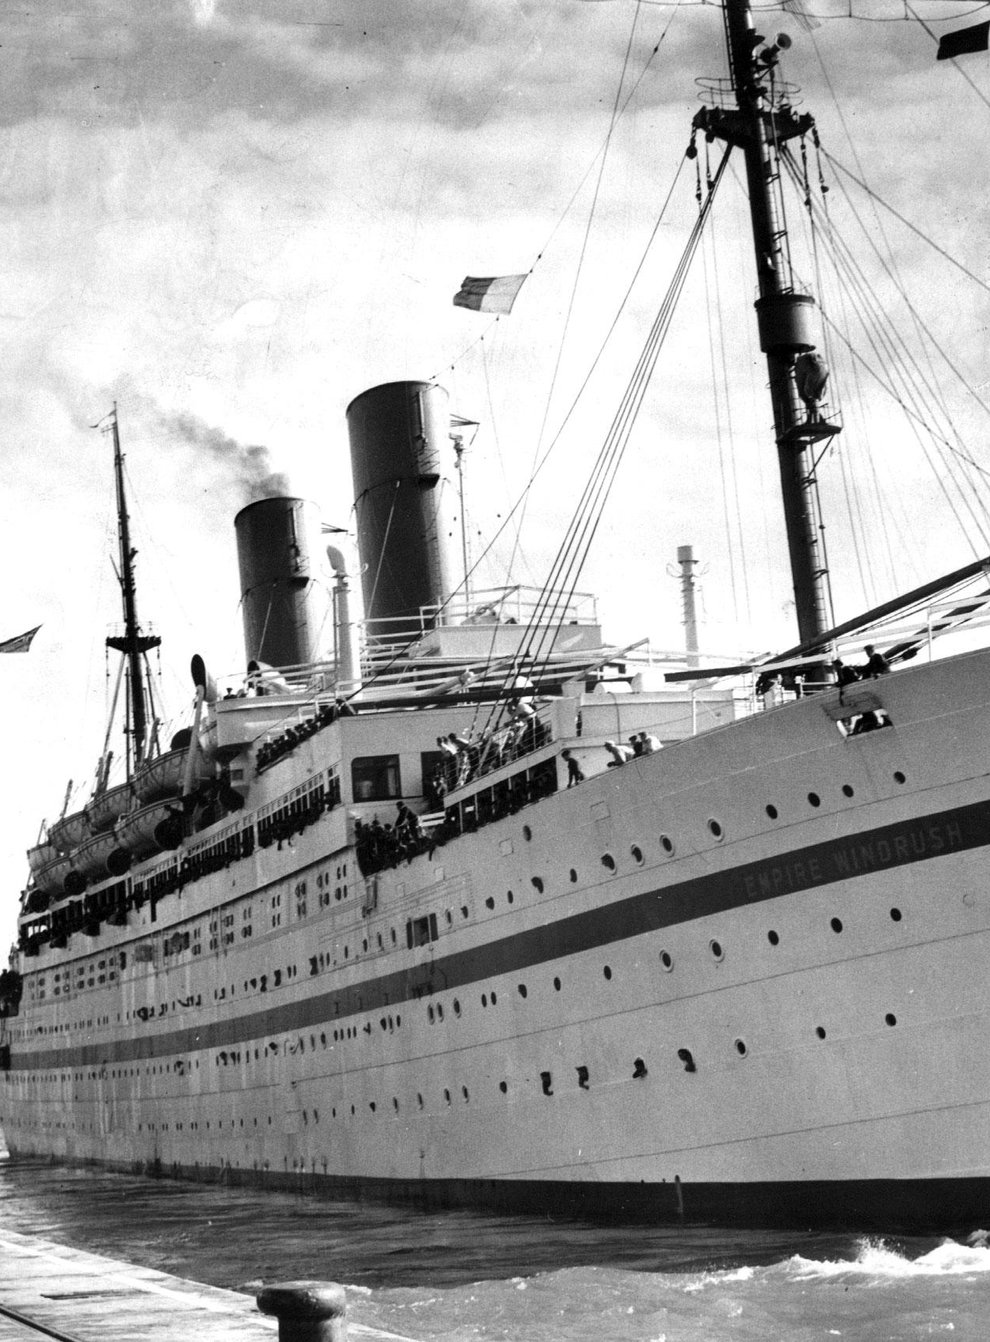 A 1954 photo of the then-troopship, the Empire Windrush, docked in Southampton